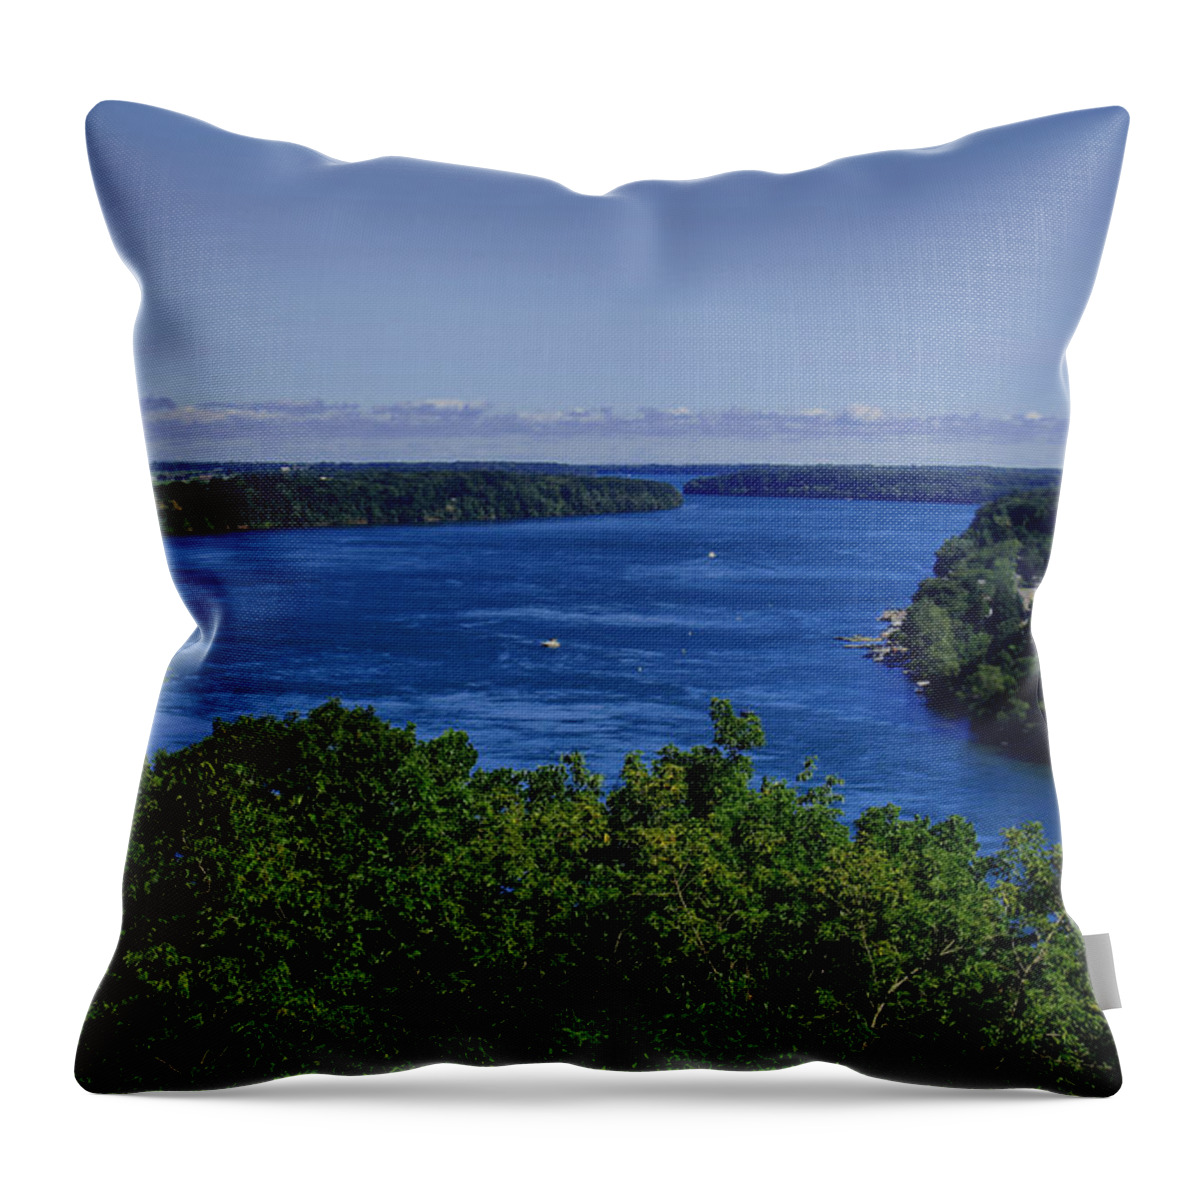 Photography Throw Pillow featuring the photograph Lower Niagara River by Nicky Jameson